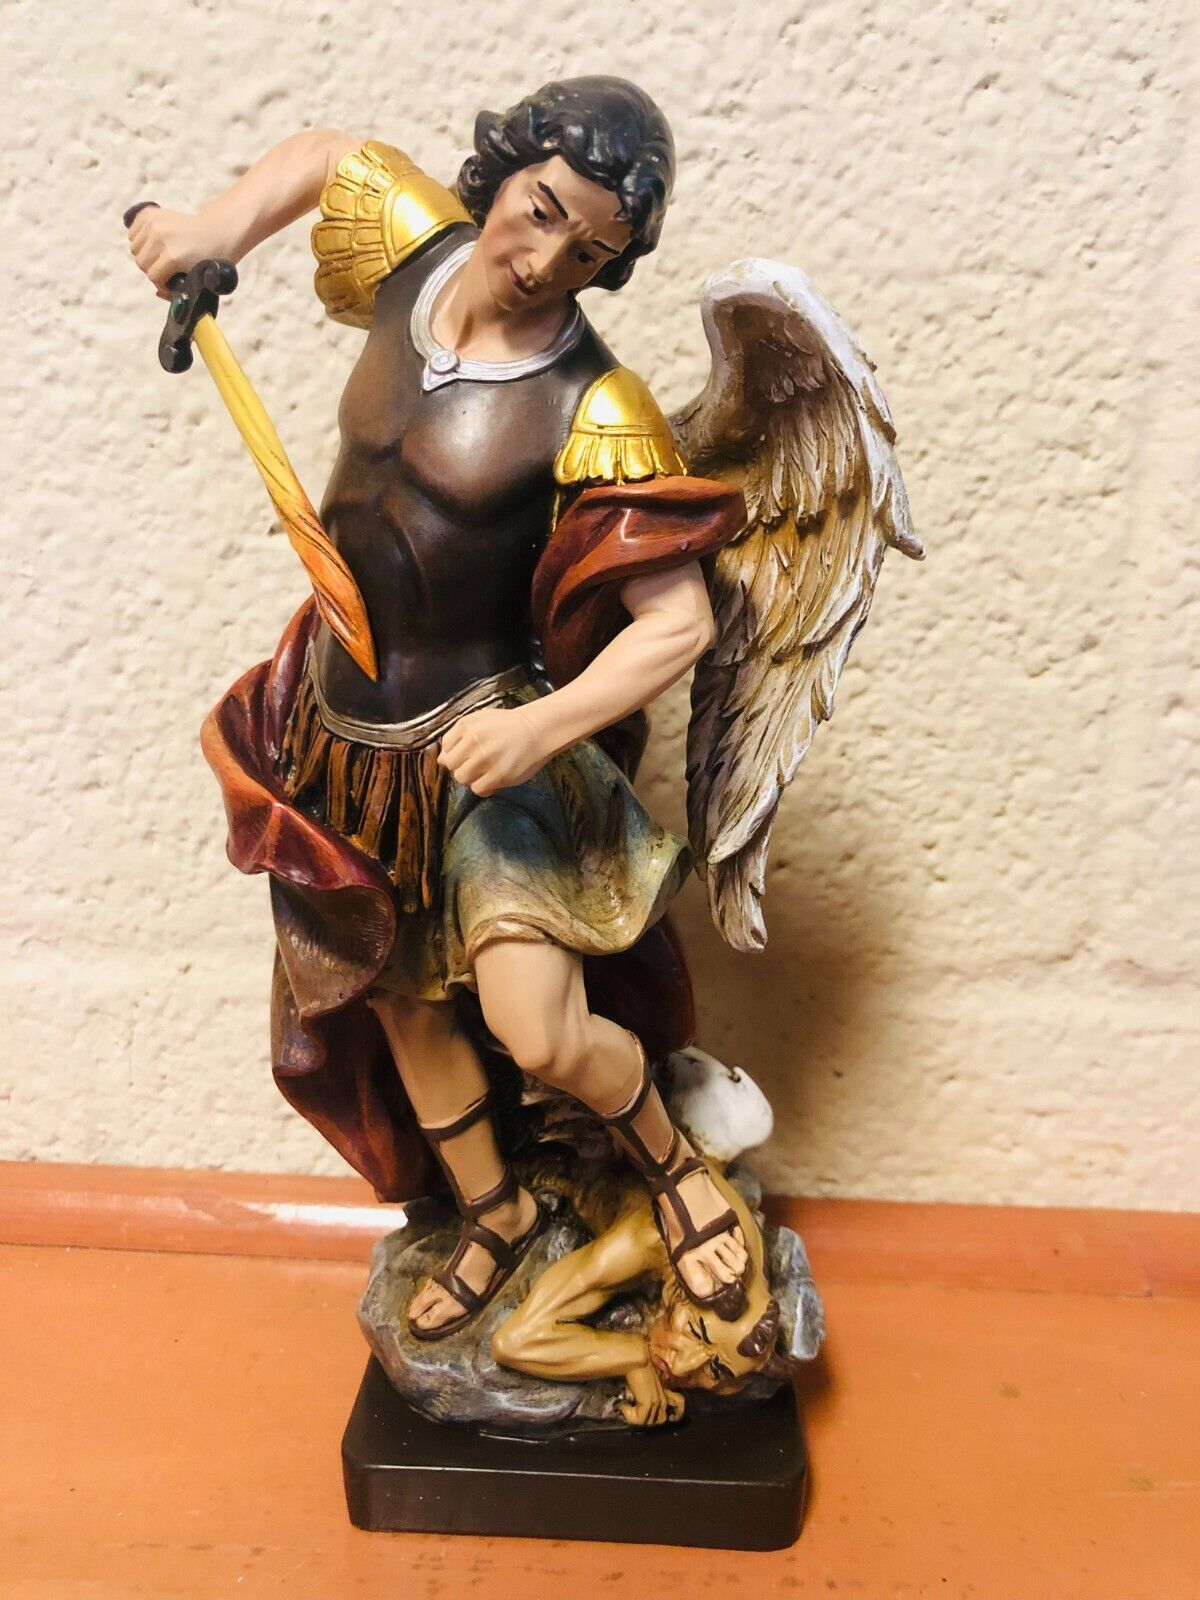 Saint Michael The Archangel 8.5" Statue, New - Bob and Penny Lord